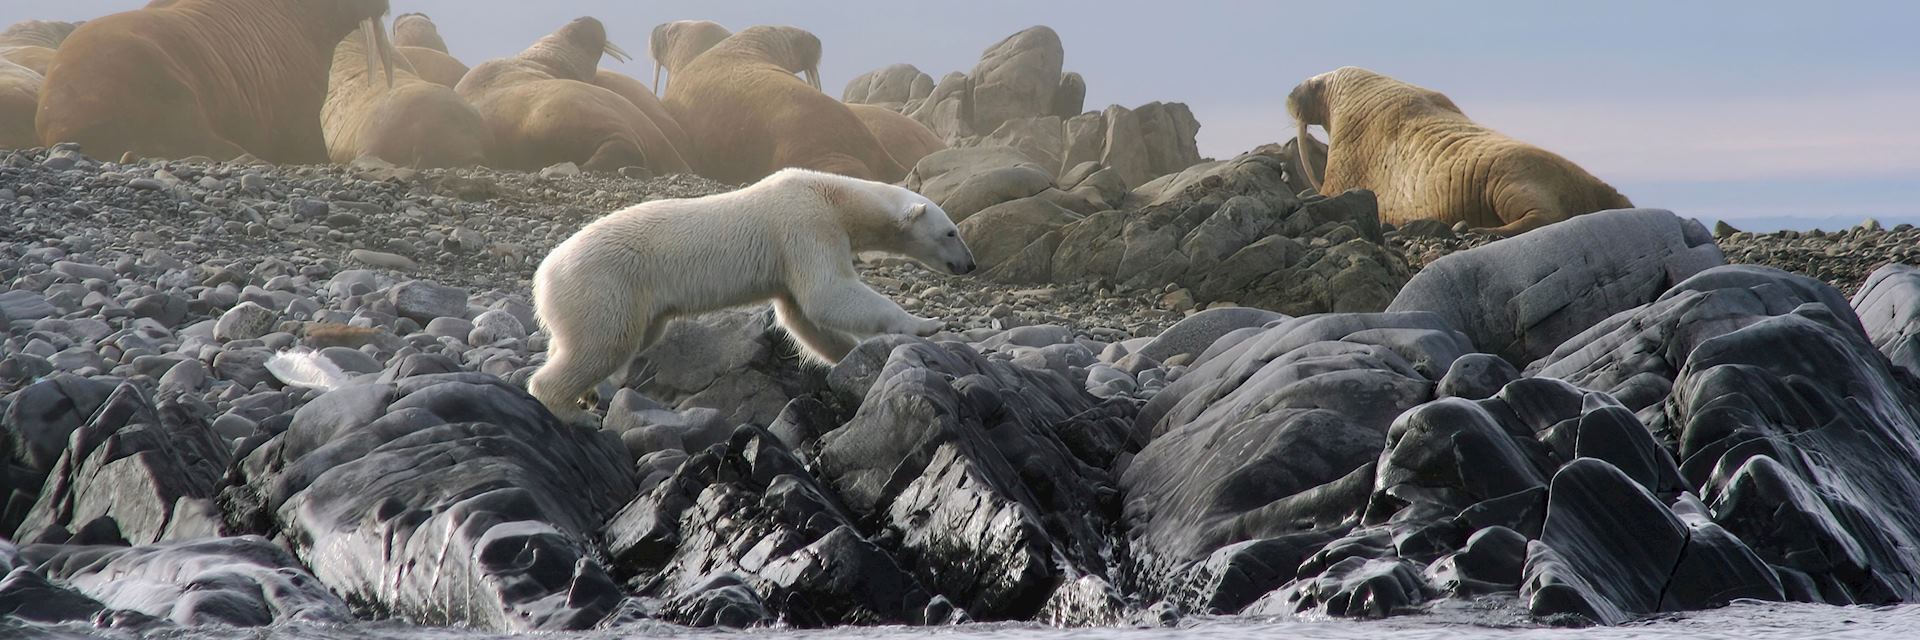 Polar bear and walrus colony spotted on a North Spitsbergen cruise